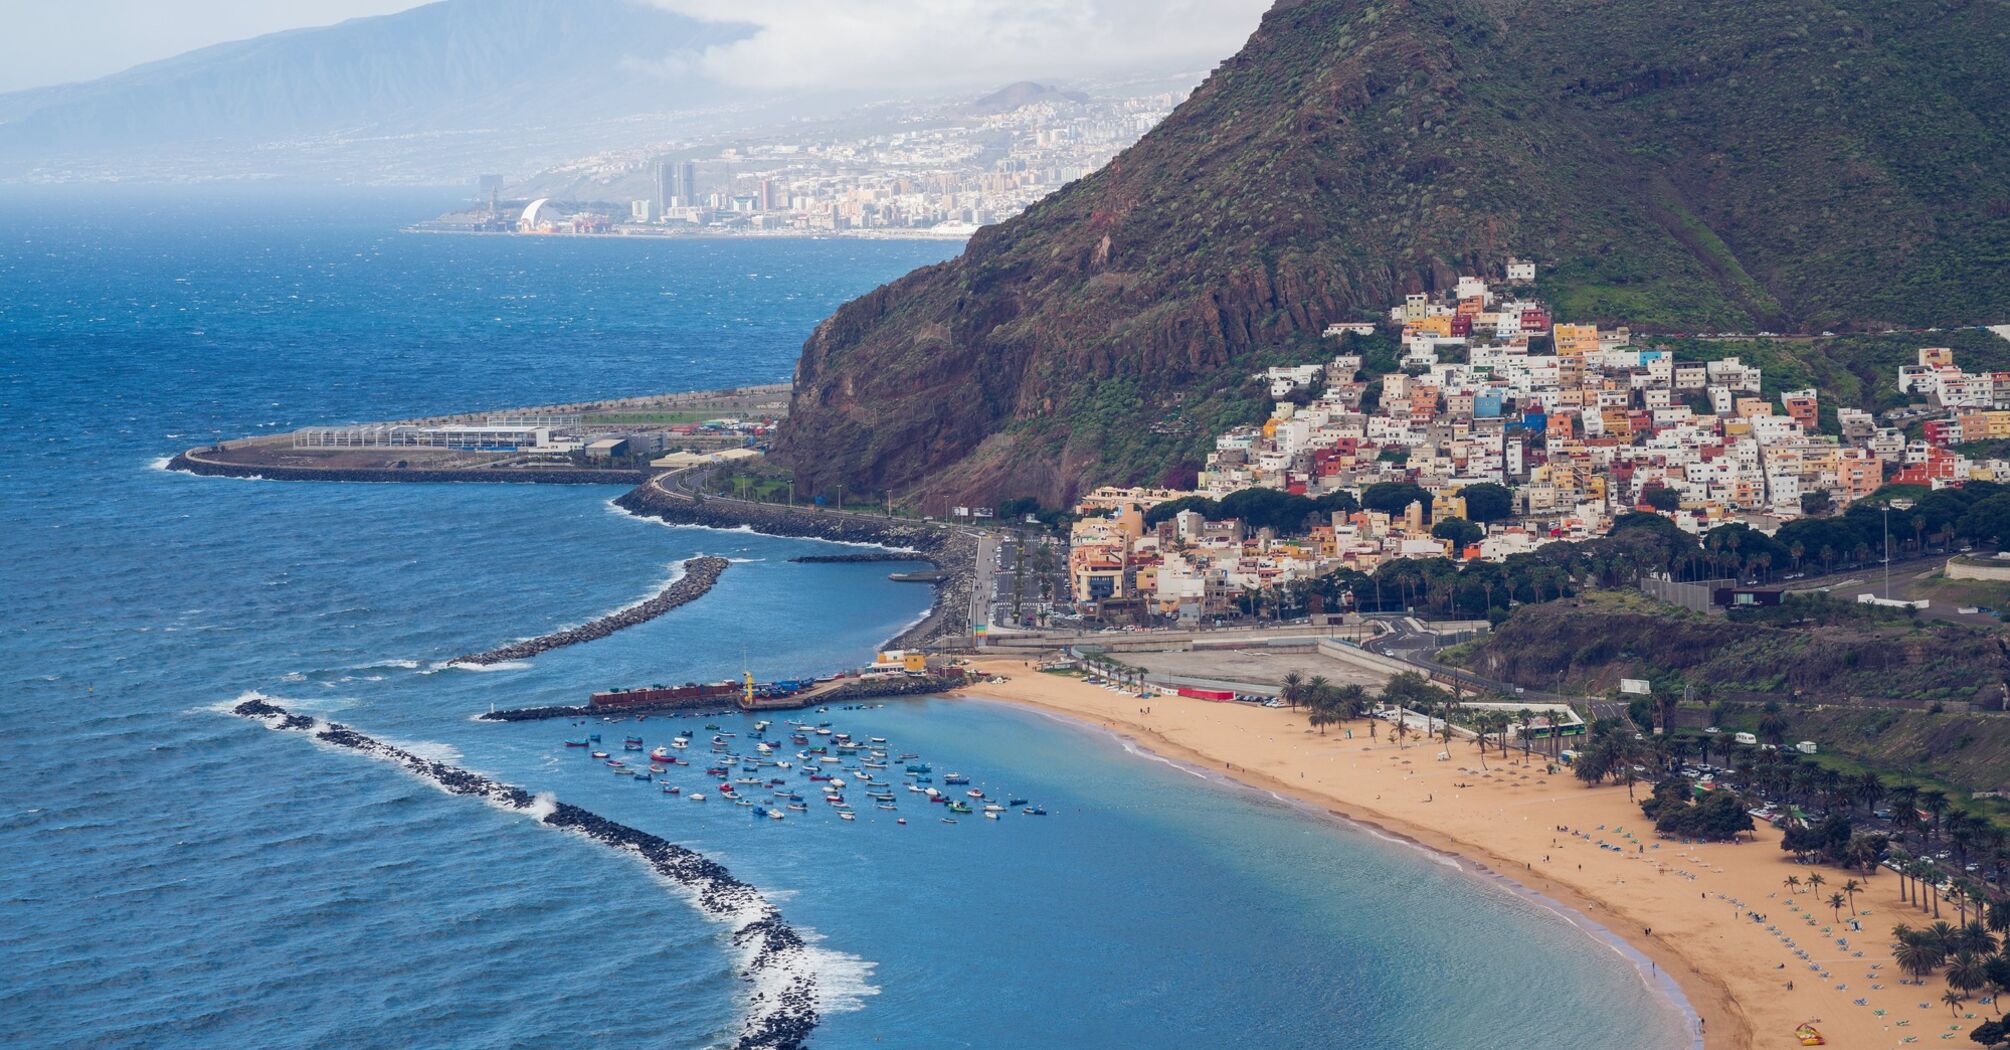 Canary Islands: why paradise for tourists becomes unbearable for locals